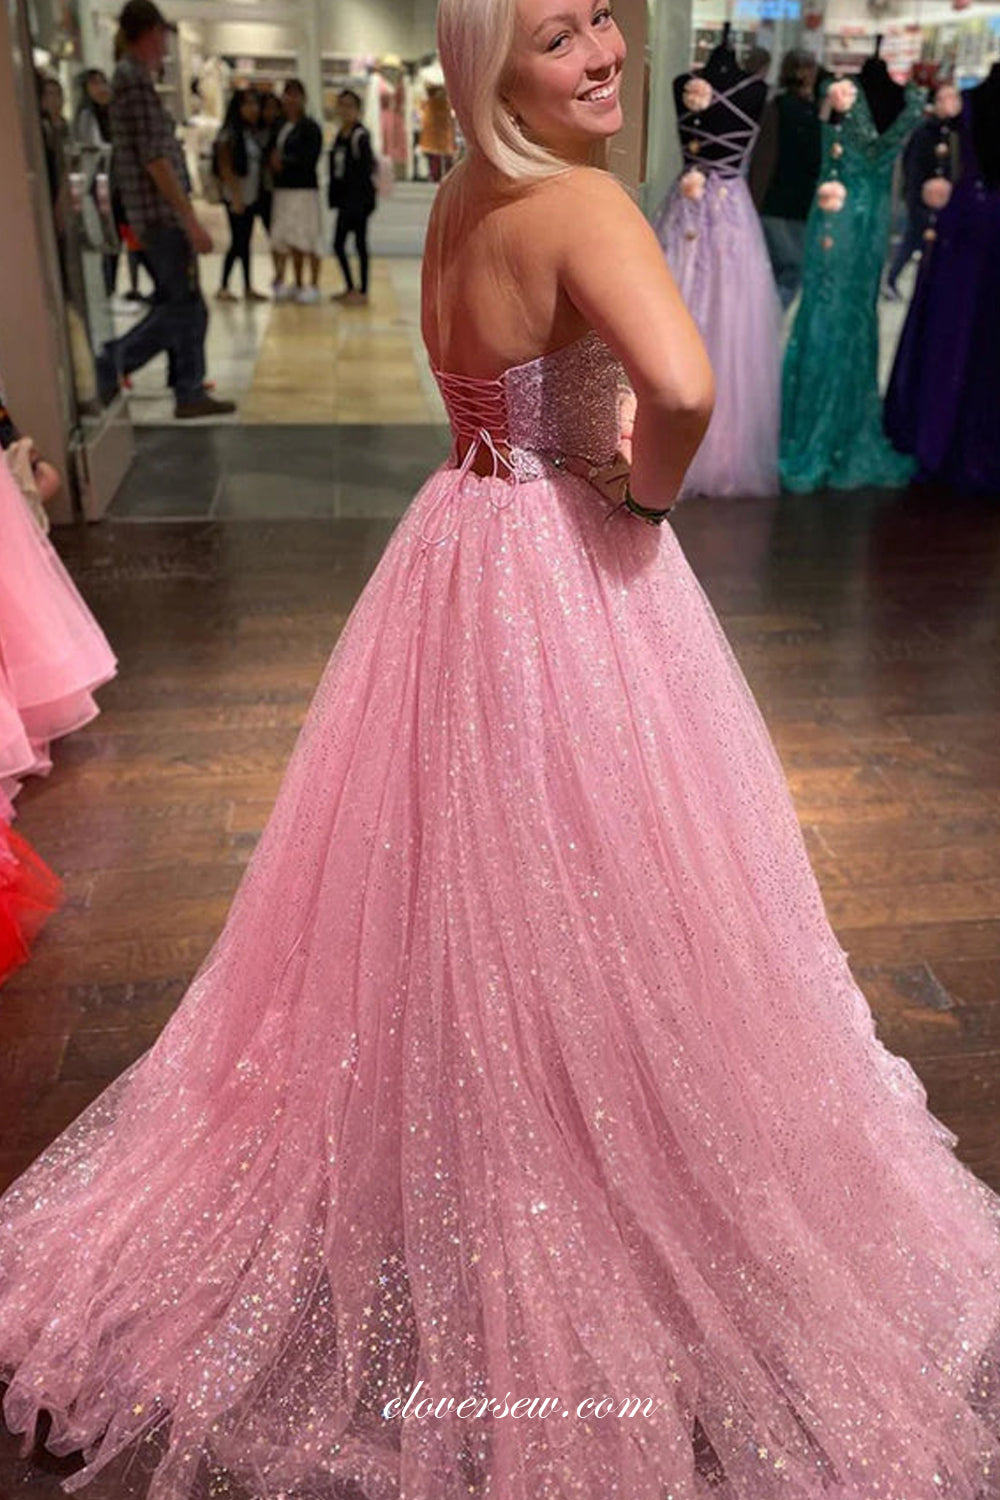 Pink Glitter Tulle Sweetheart Strapless A-line Prom Dresses, CP1019